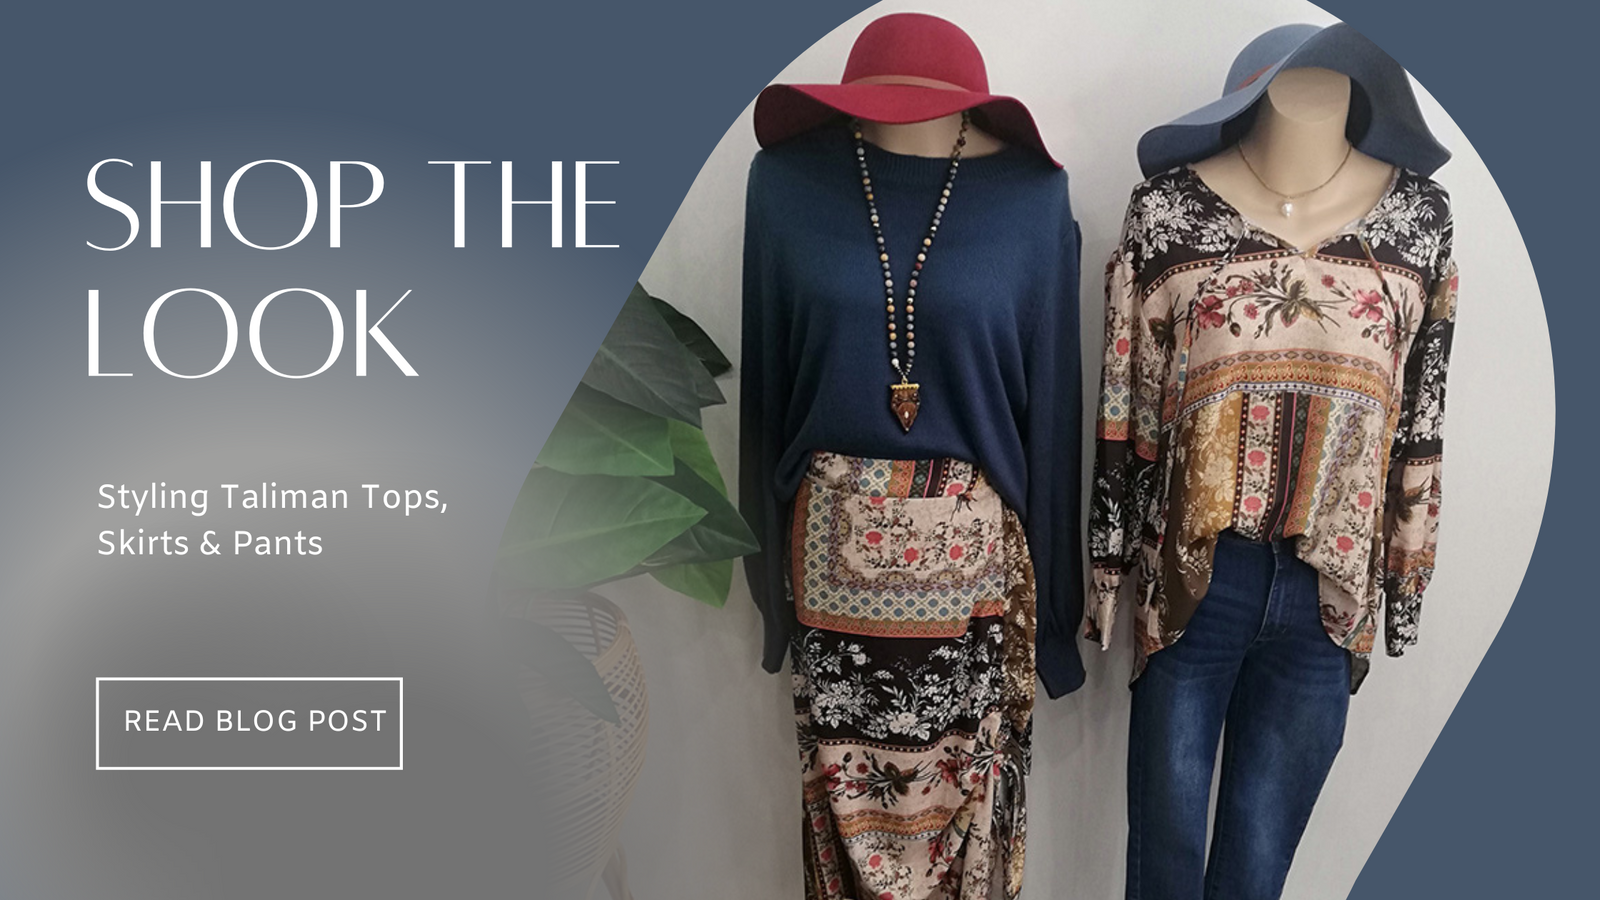 Shop the Look - Styling Talisman Tops, Skirts and Pants - Kindred